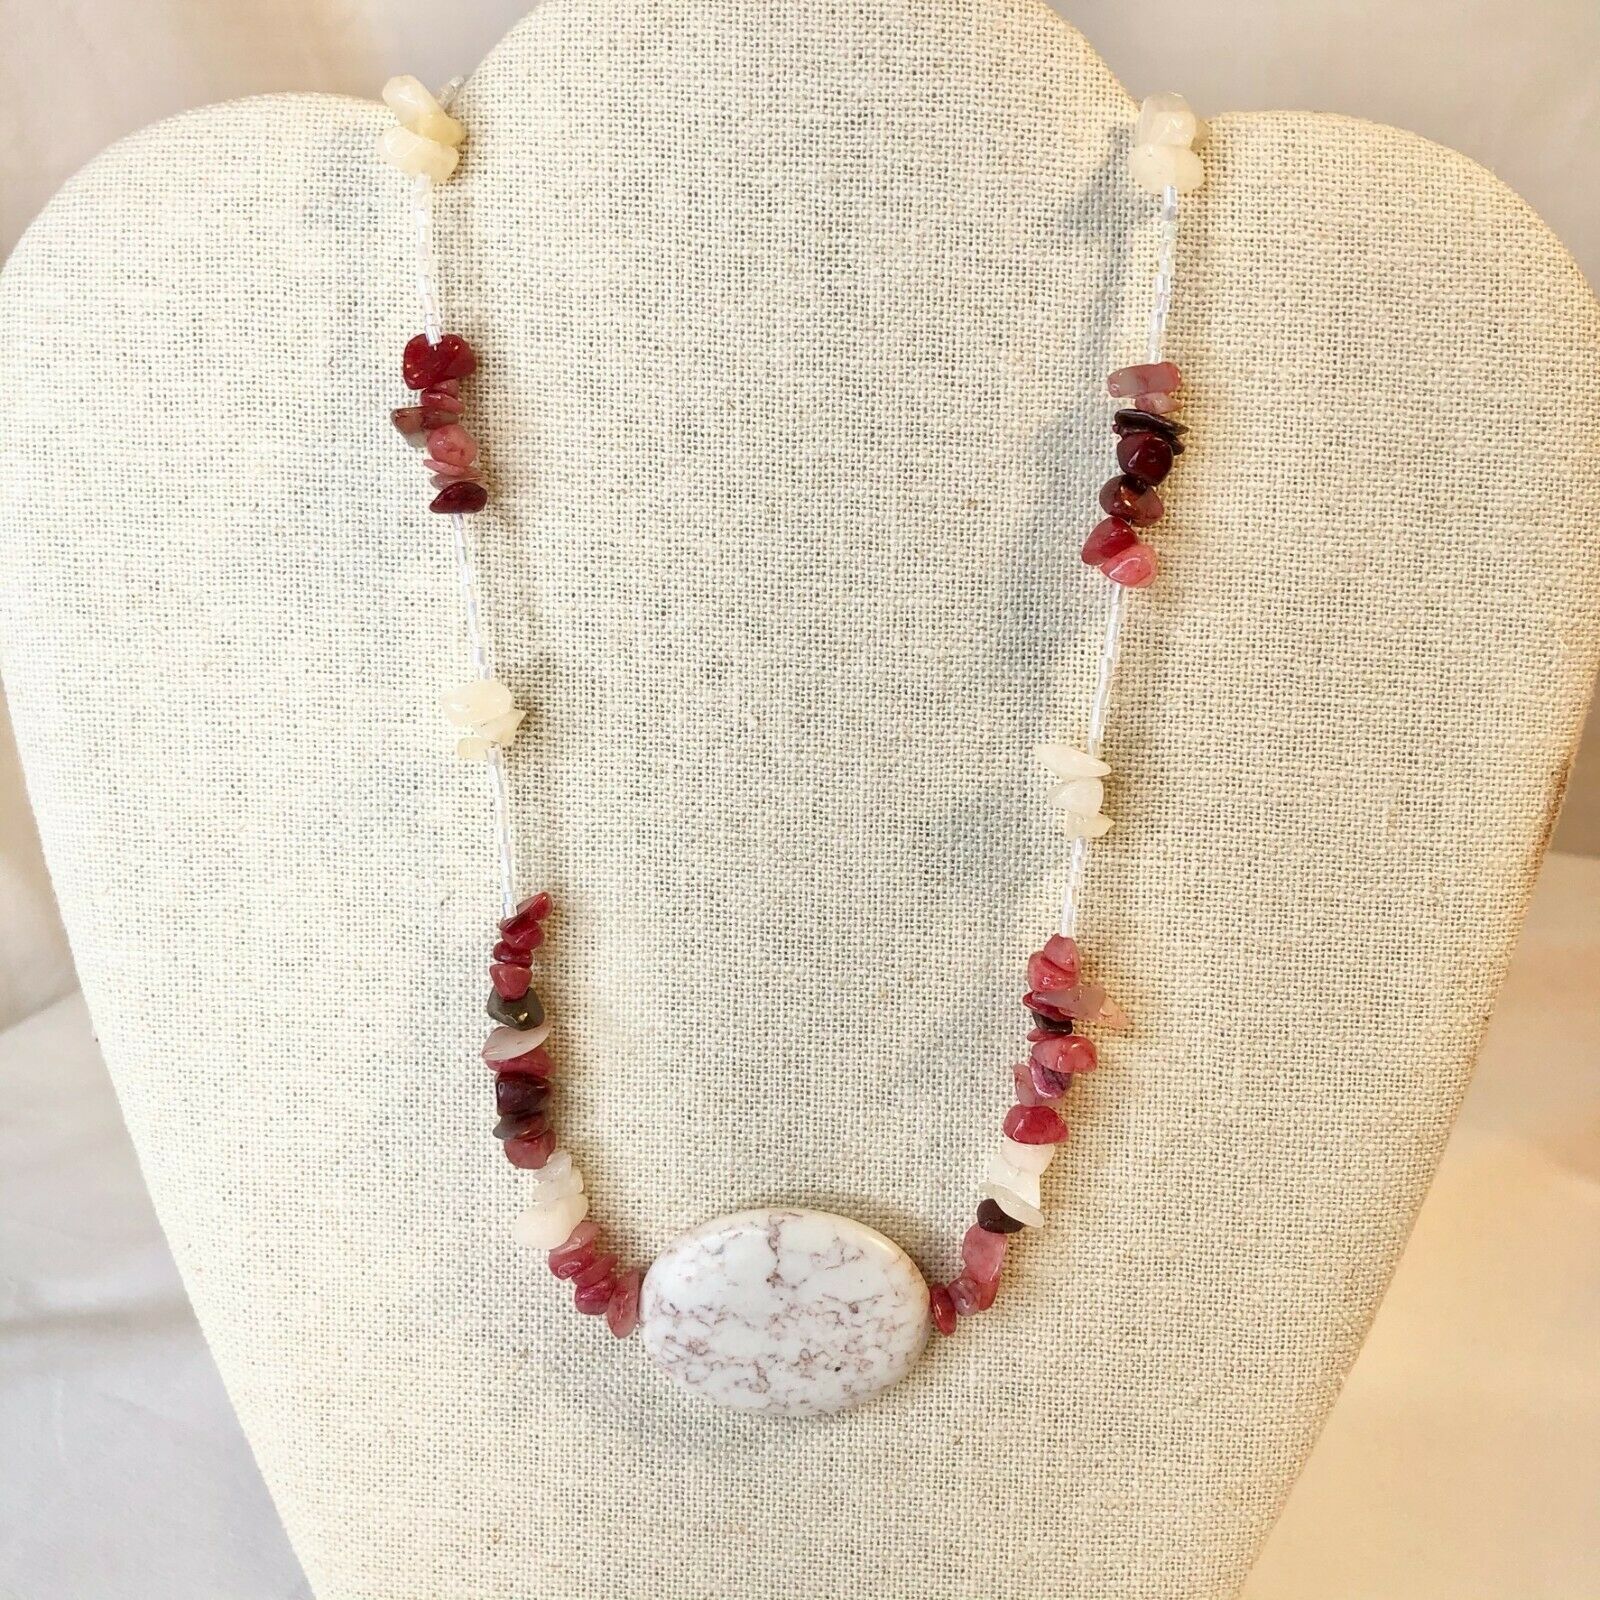 Handcrafted Beaded Necklace White & Pink Stones Large Marbles Beads Texture NEW - $24.75